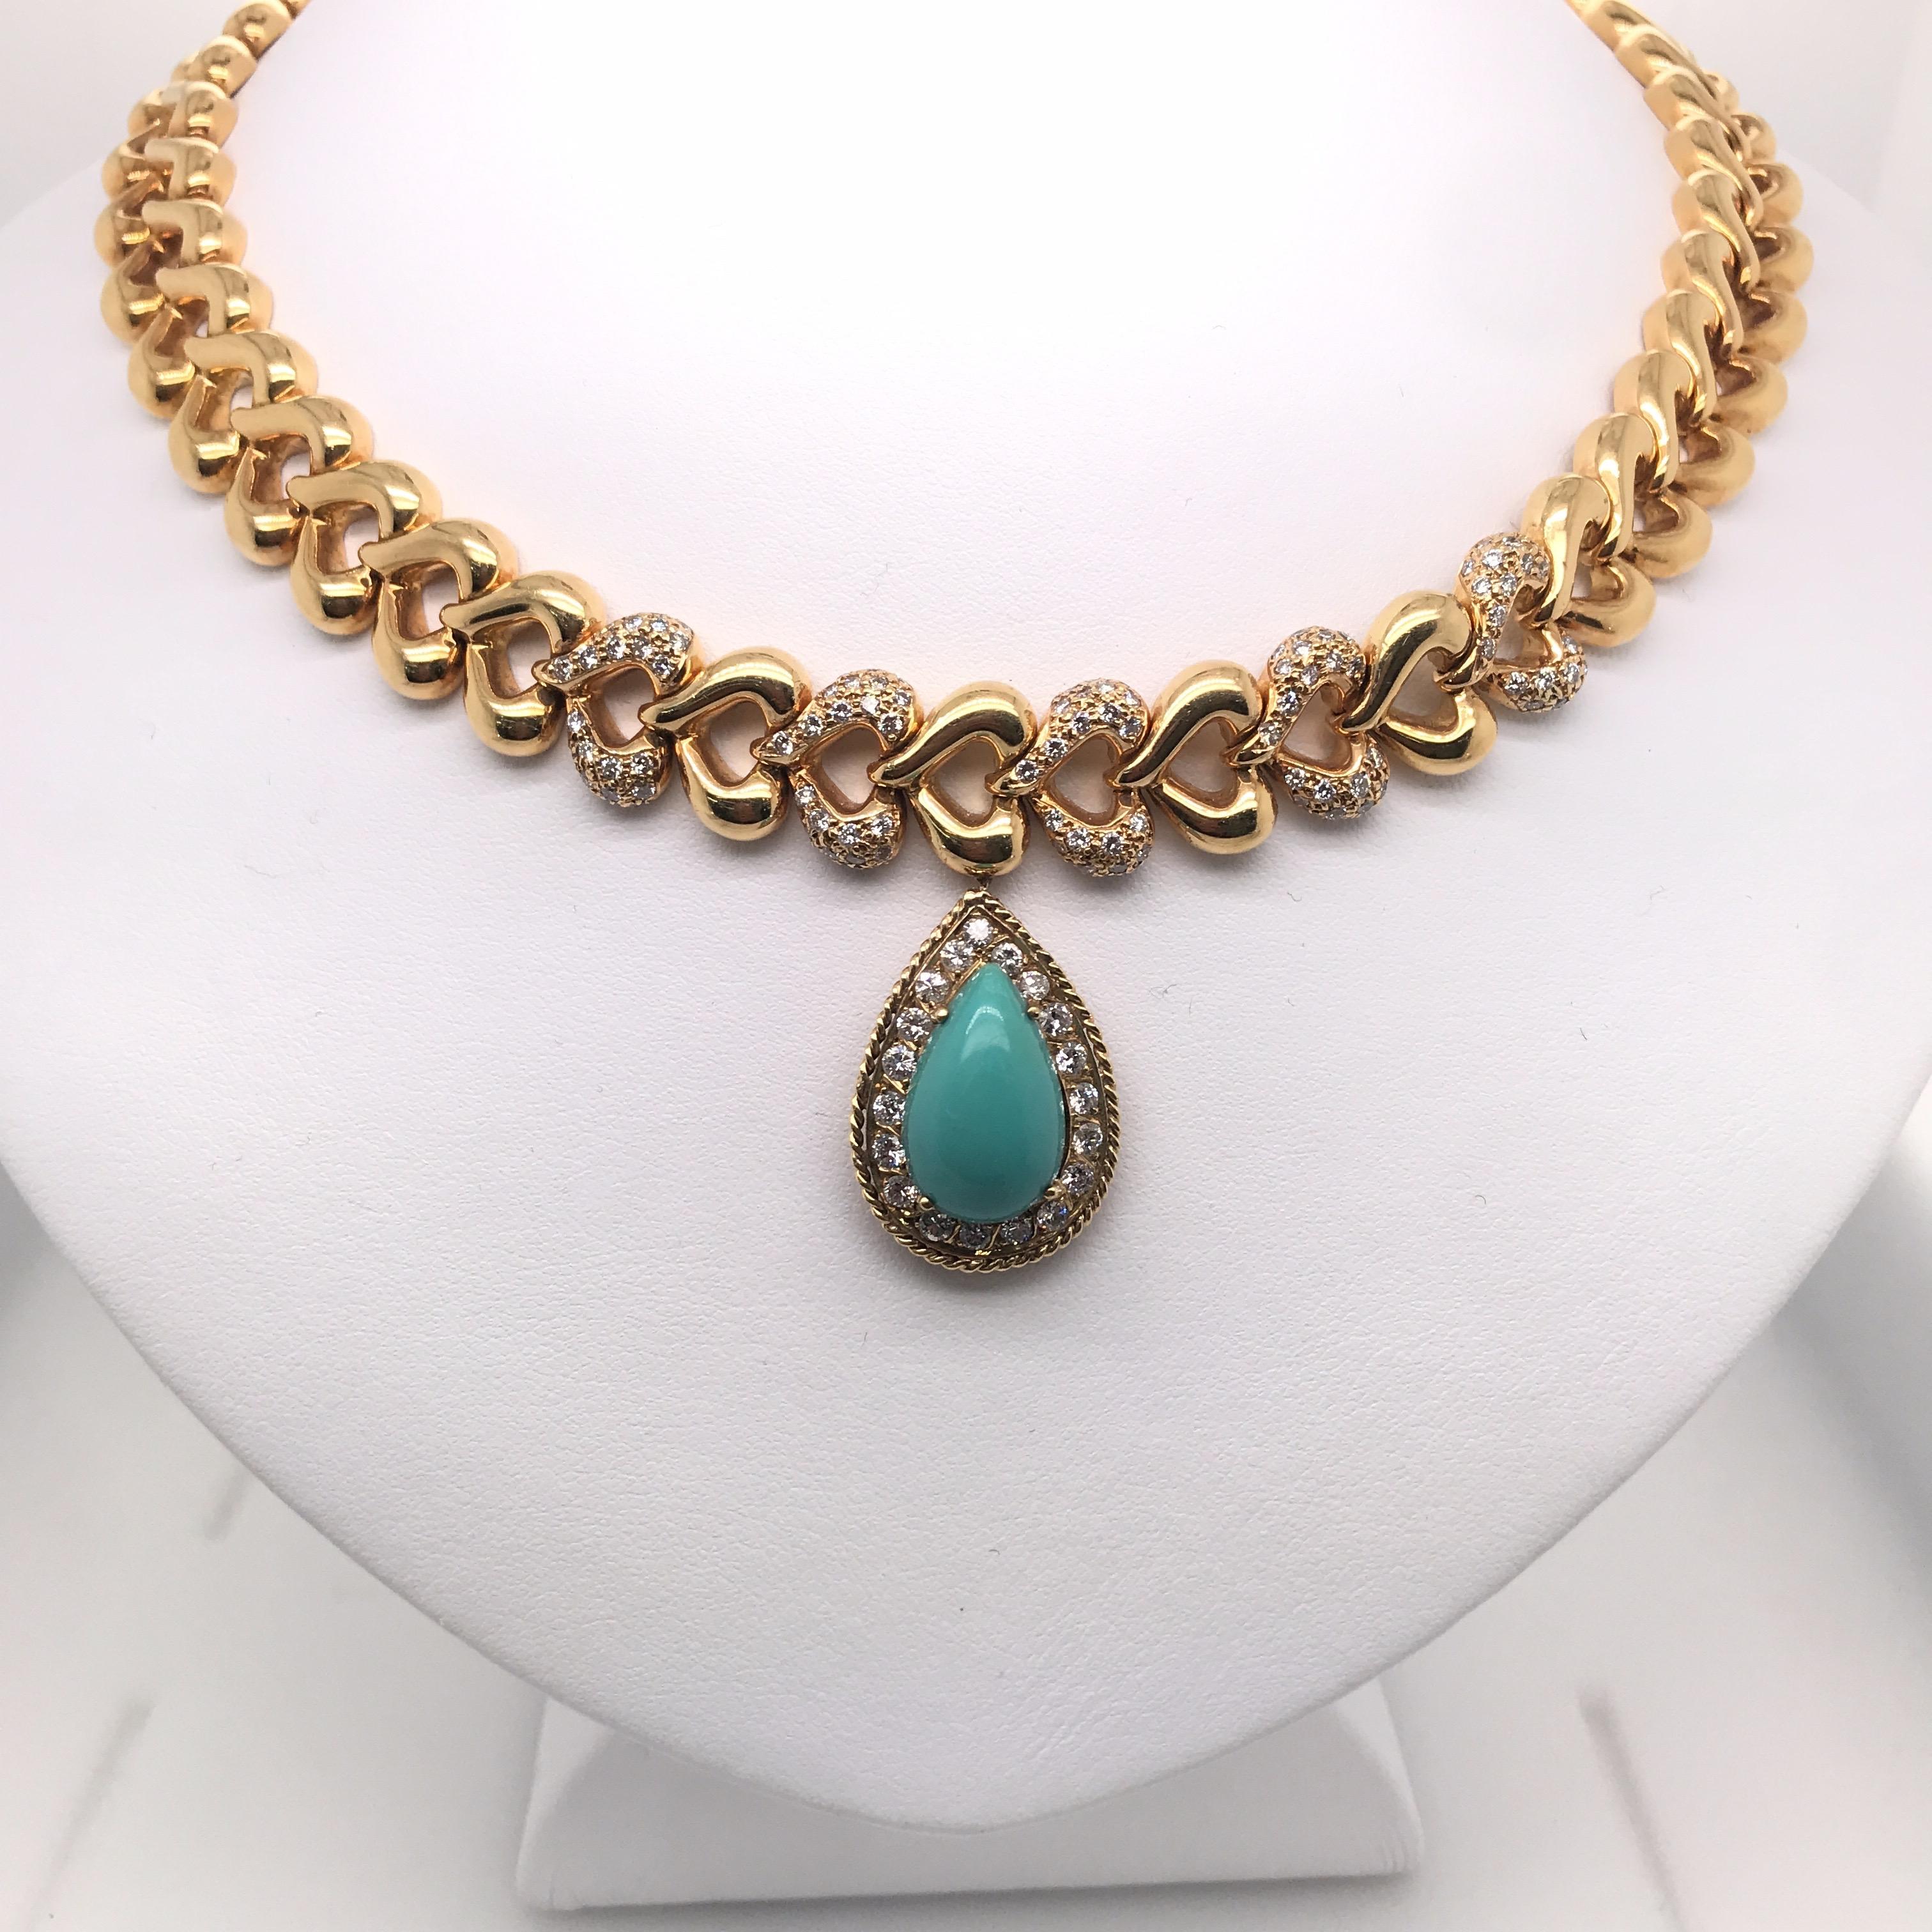 18K Yellow gold necklace featuring one pear shape Turquoise flanked with round brilliants and a heart motif collar. 
5 Diamond Heart Links
Approximately 2 Carats